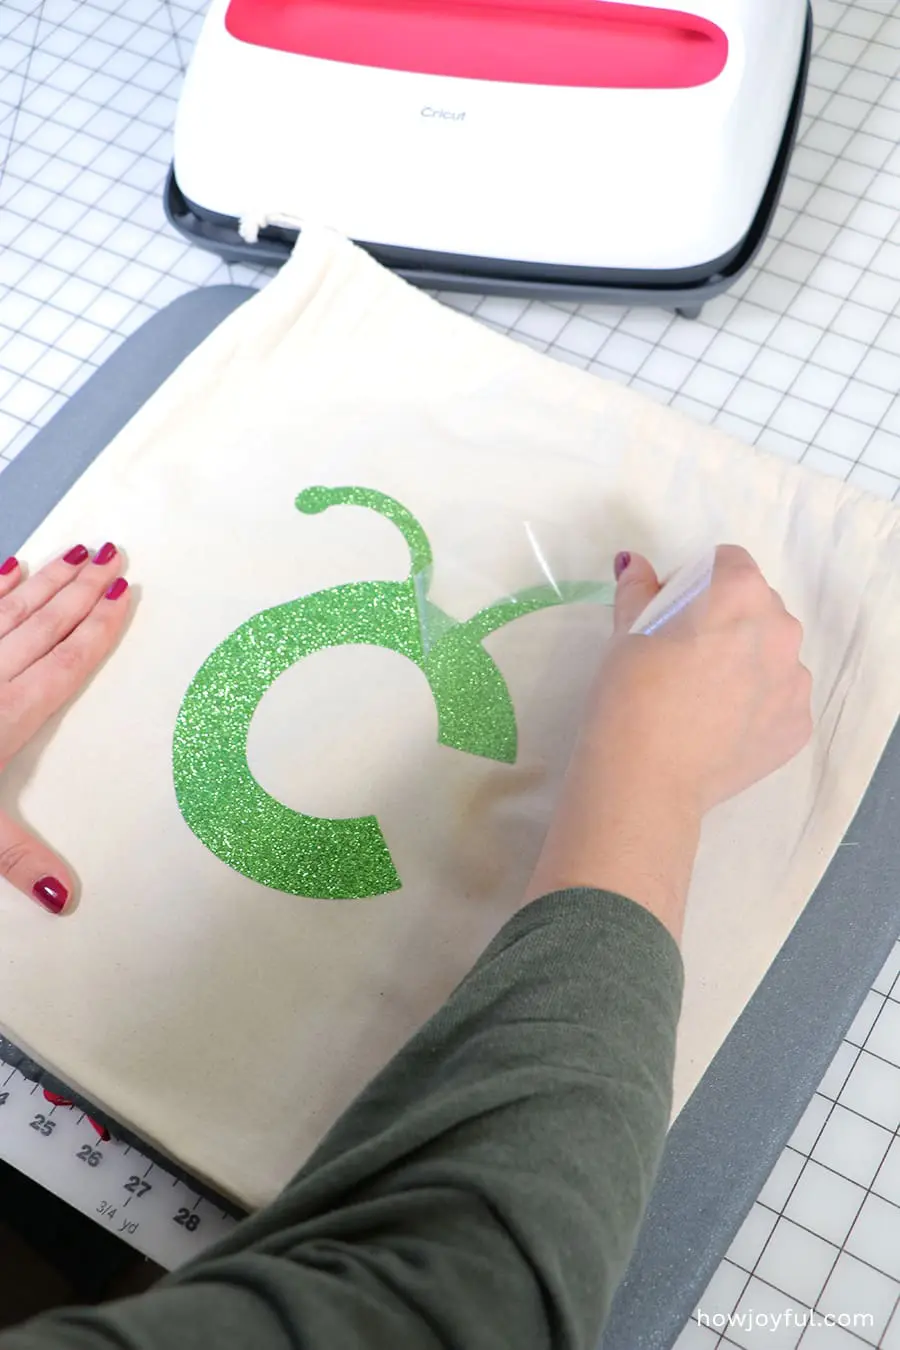 DON'T RUIN YOUR PROJECT! How To Iron On Cricut Vinyl With Regular Irons for  Beginners 